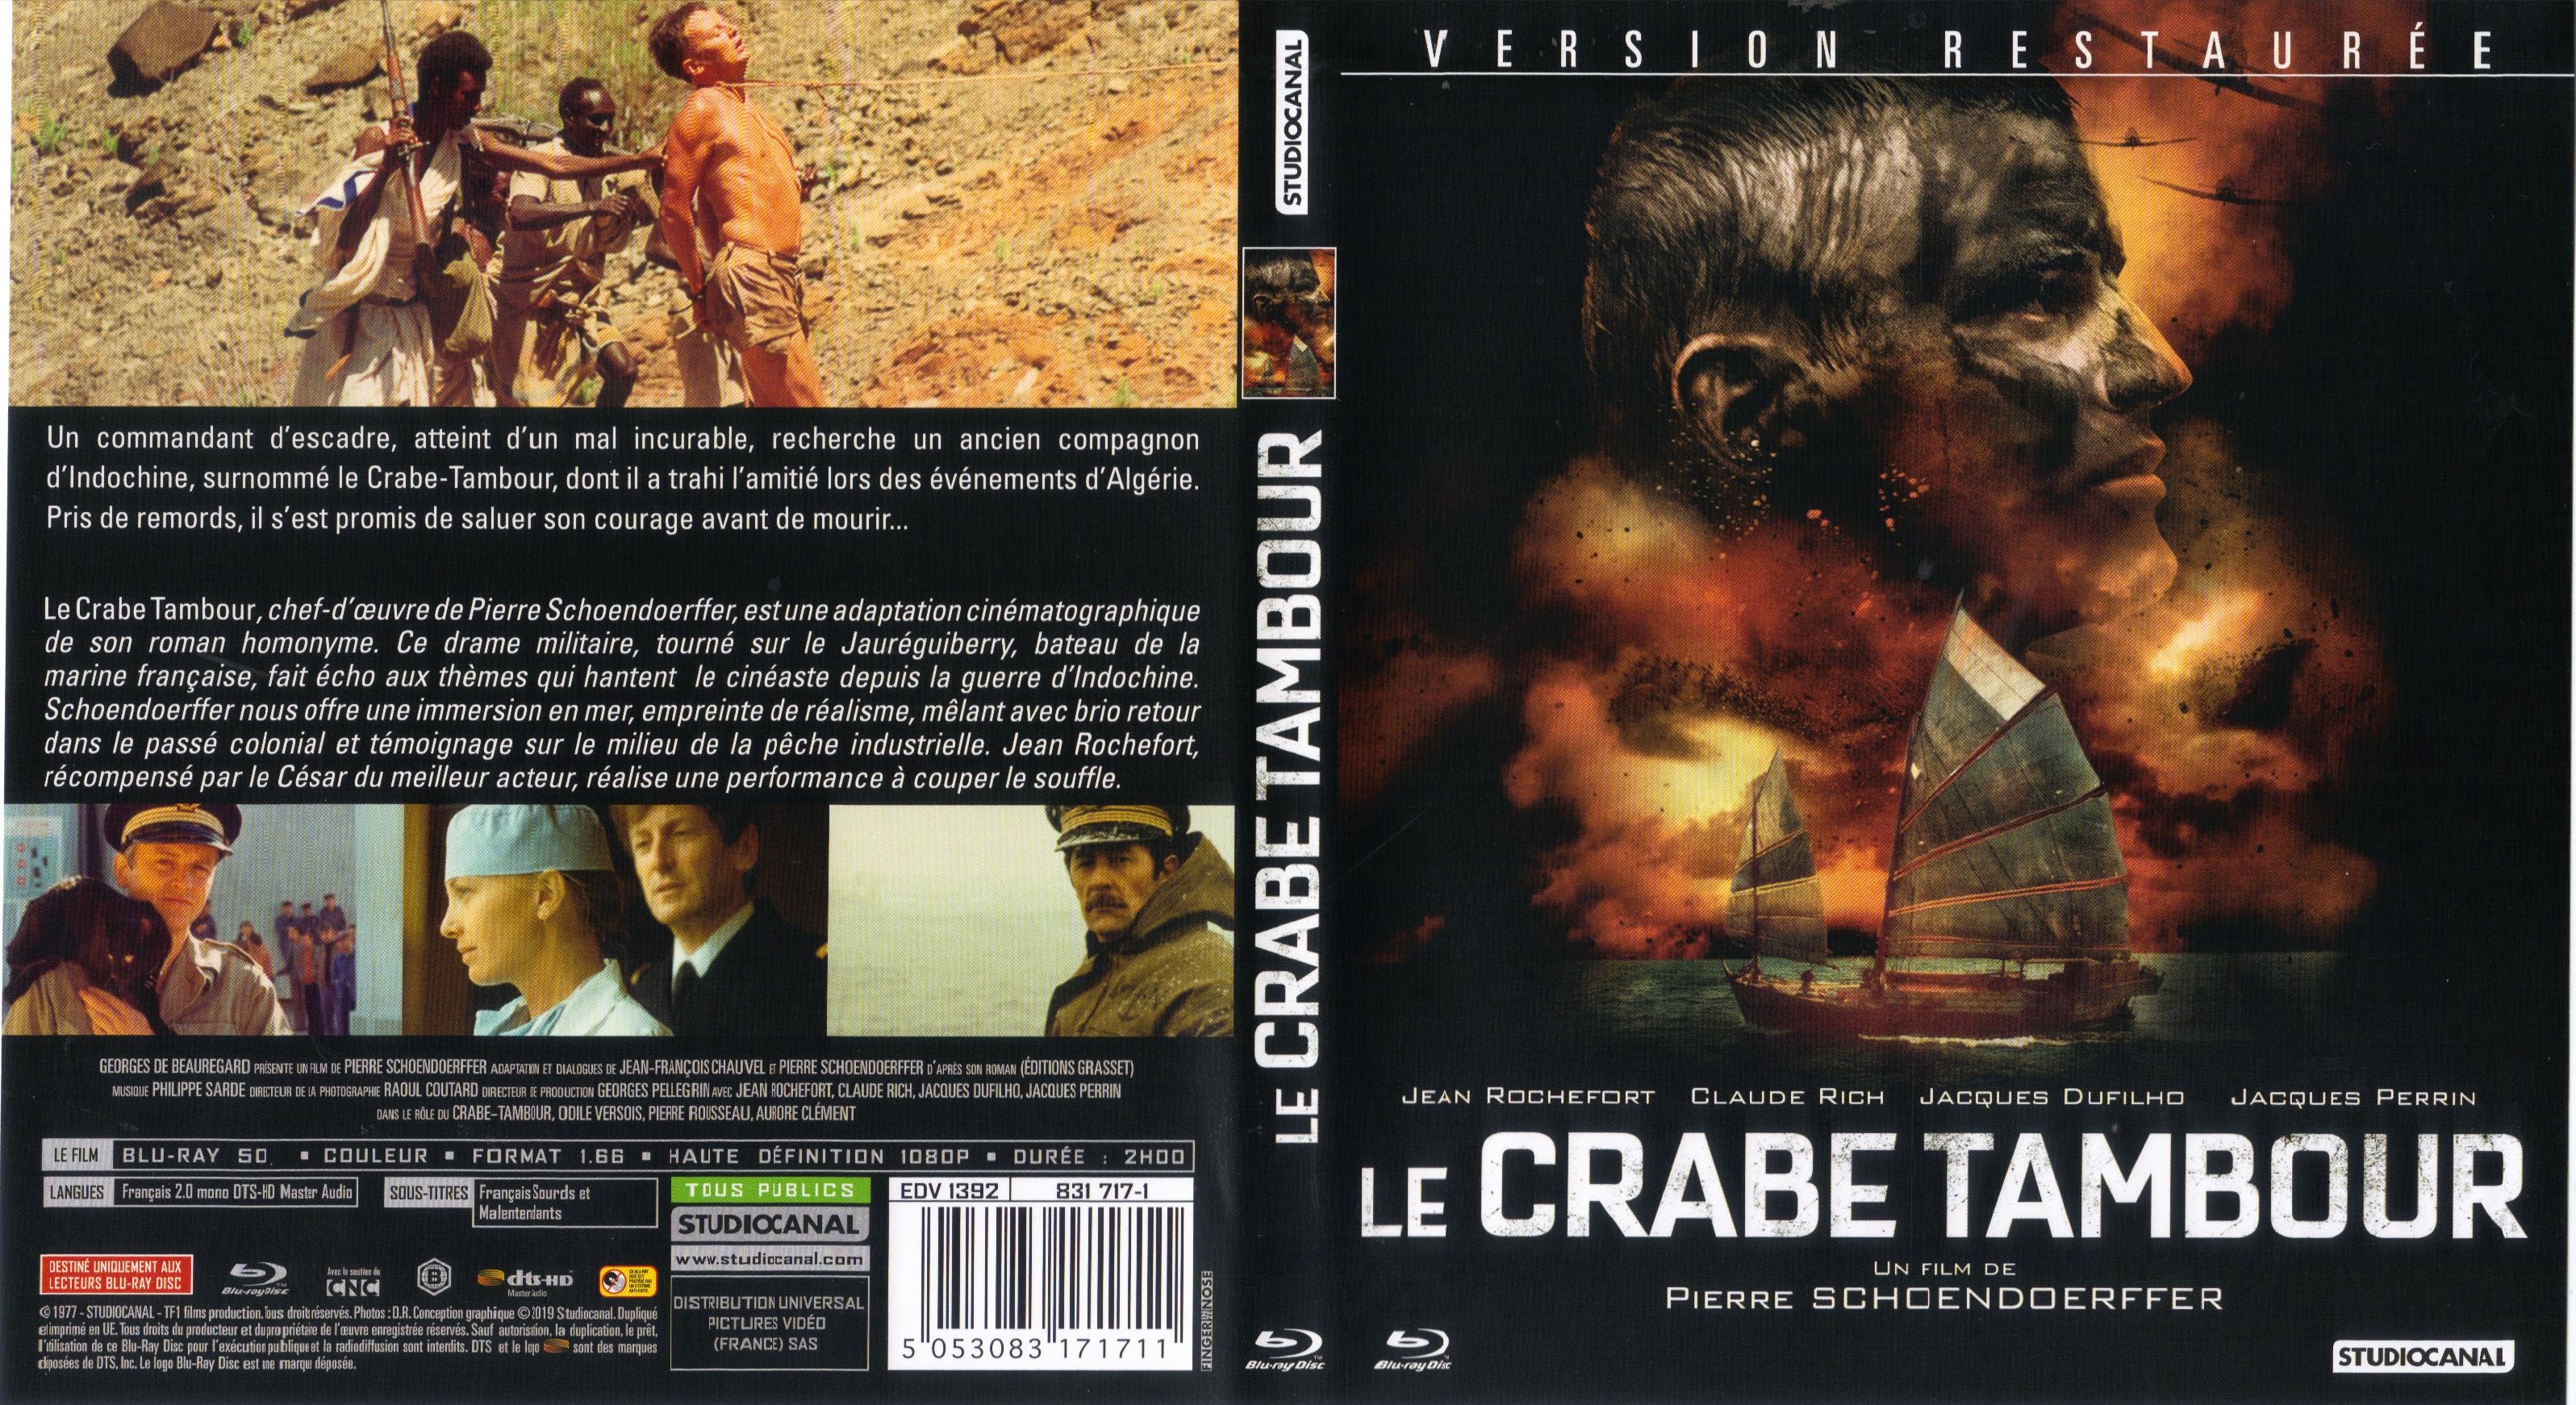 Jaquette DVD Le Crabe tambour (BLU-RAY)